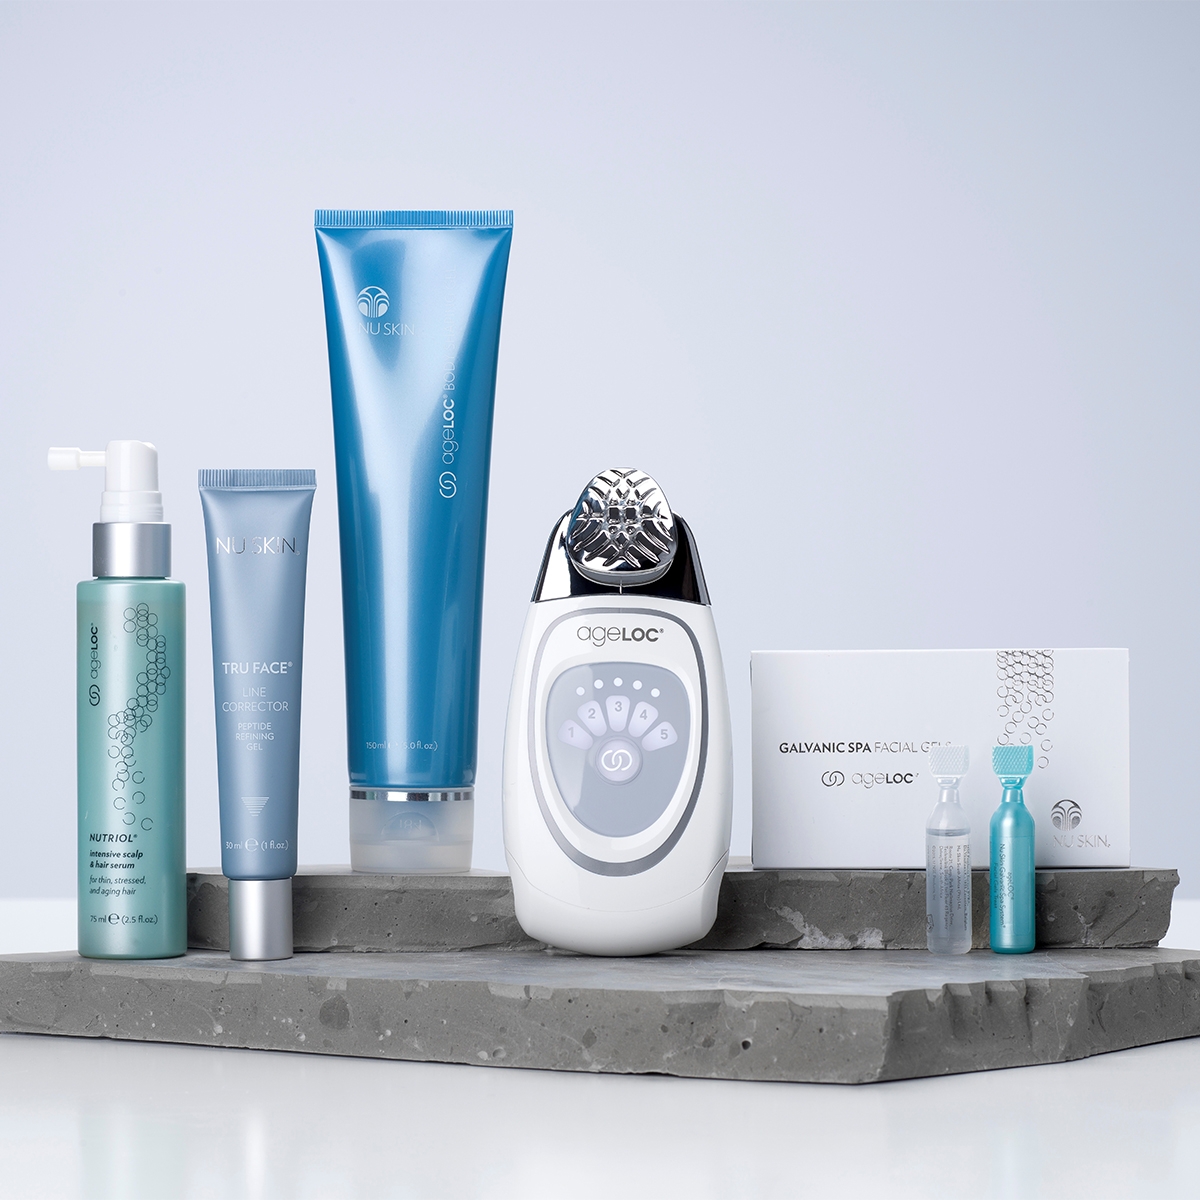 nu-skin-ageloc-galvanic-spa-anti-ageing-device-complementary-products-pdp-6.jpg